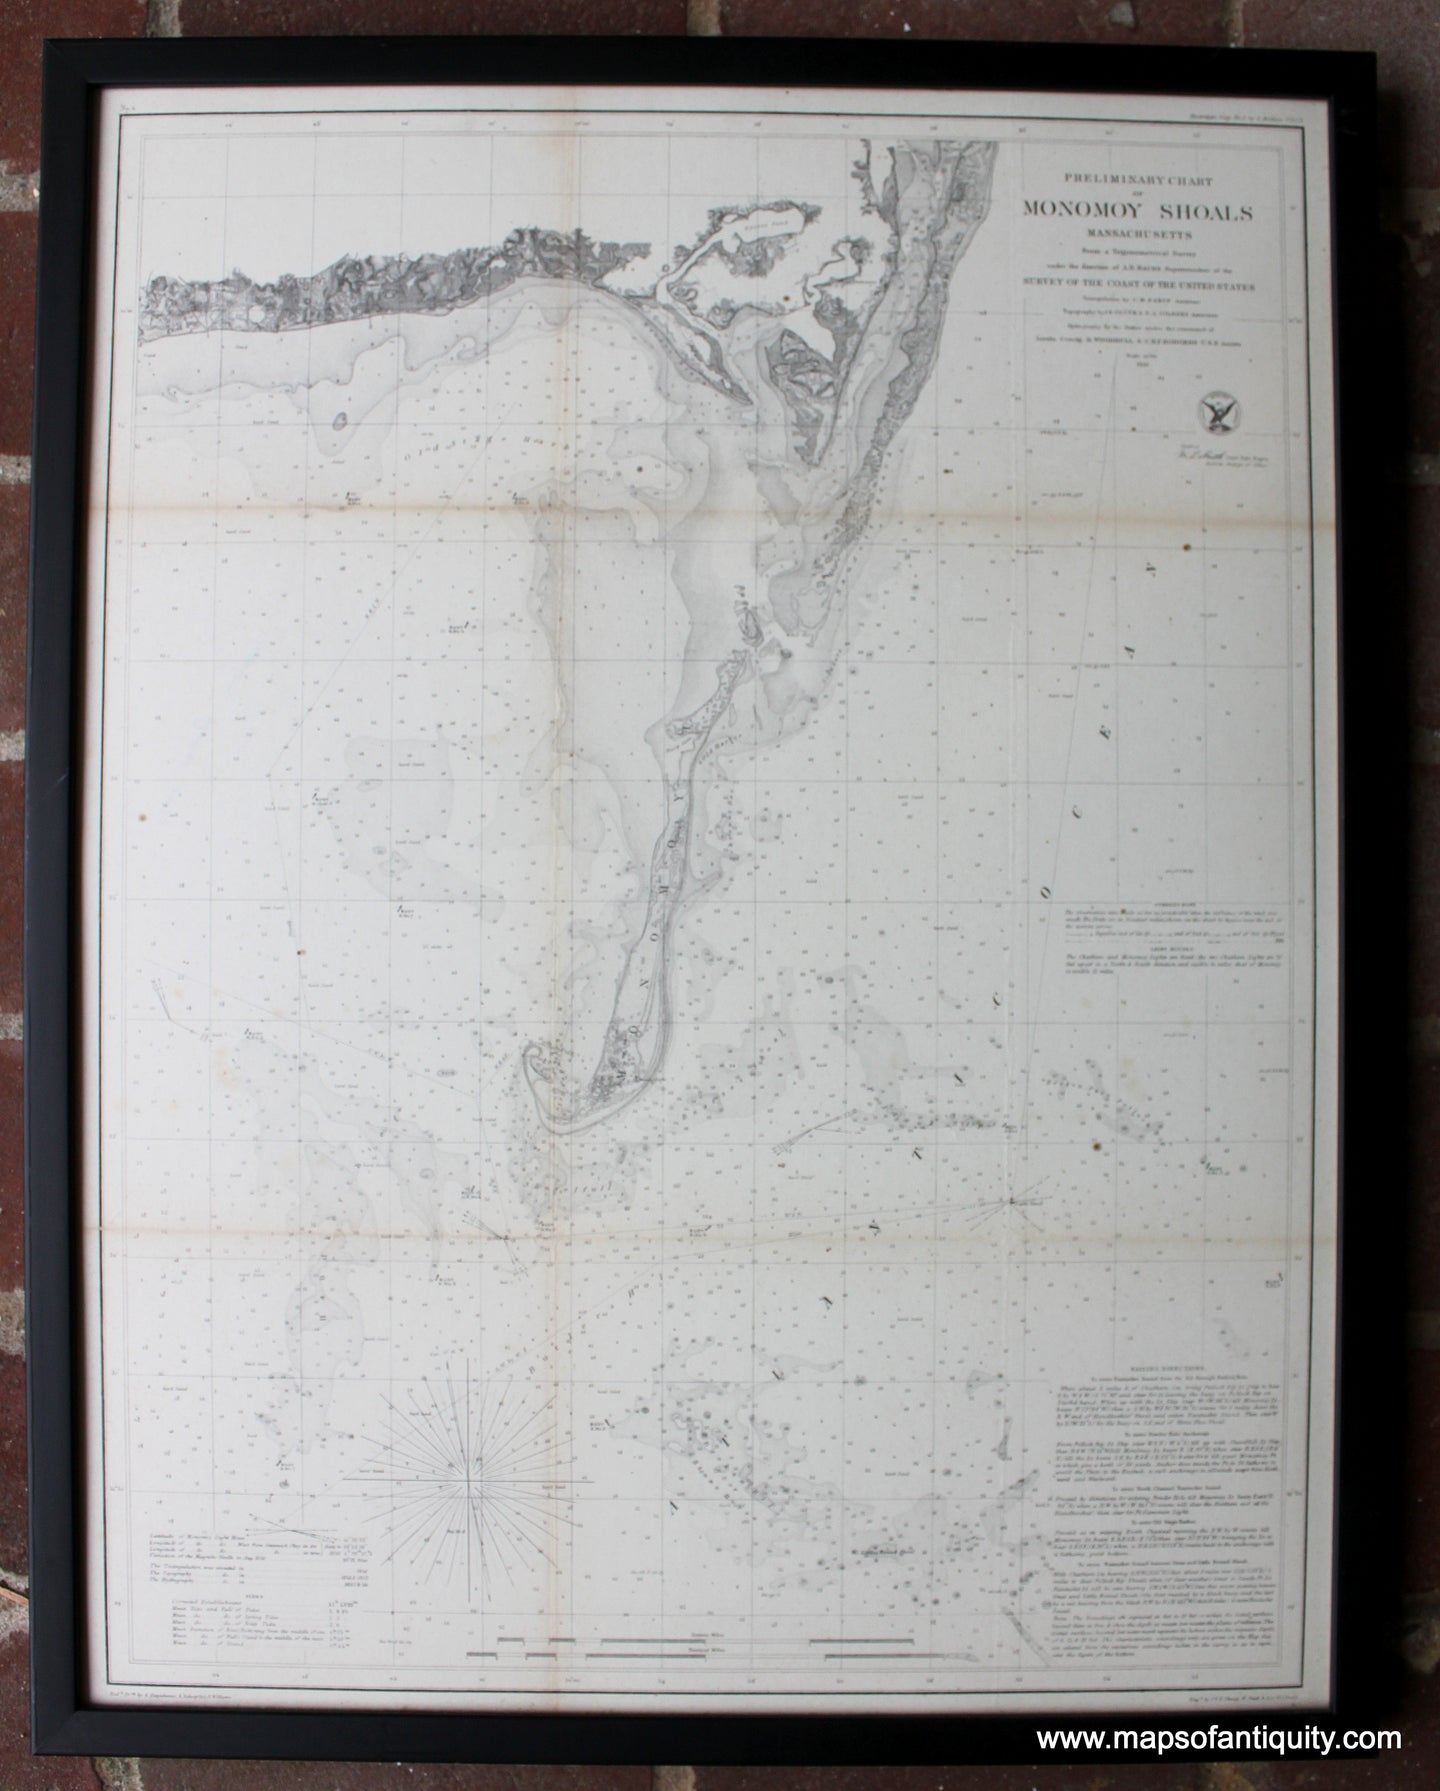 Framed-Antique-Map-Preliminary-Chart-of-Monomoy-Shoals-******-Cape-Cod-Chatham-1856-USCS-Maps-Of-Antiquity